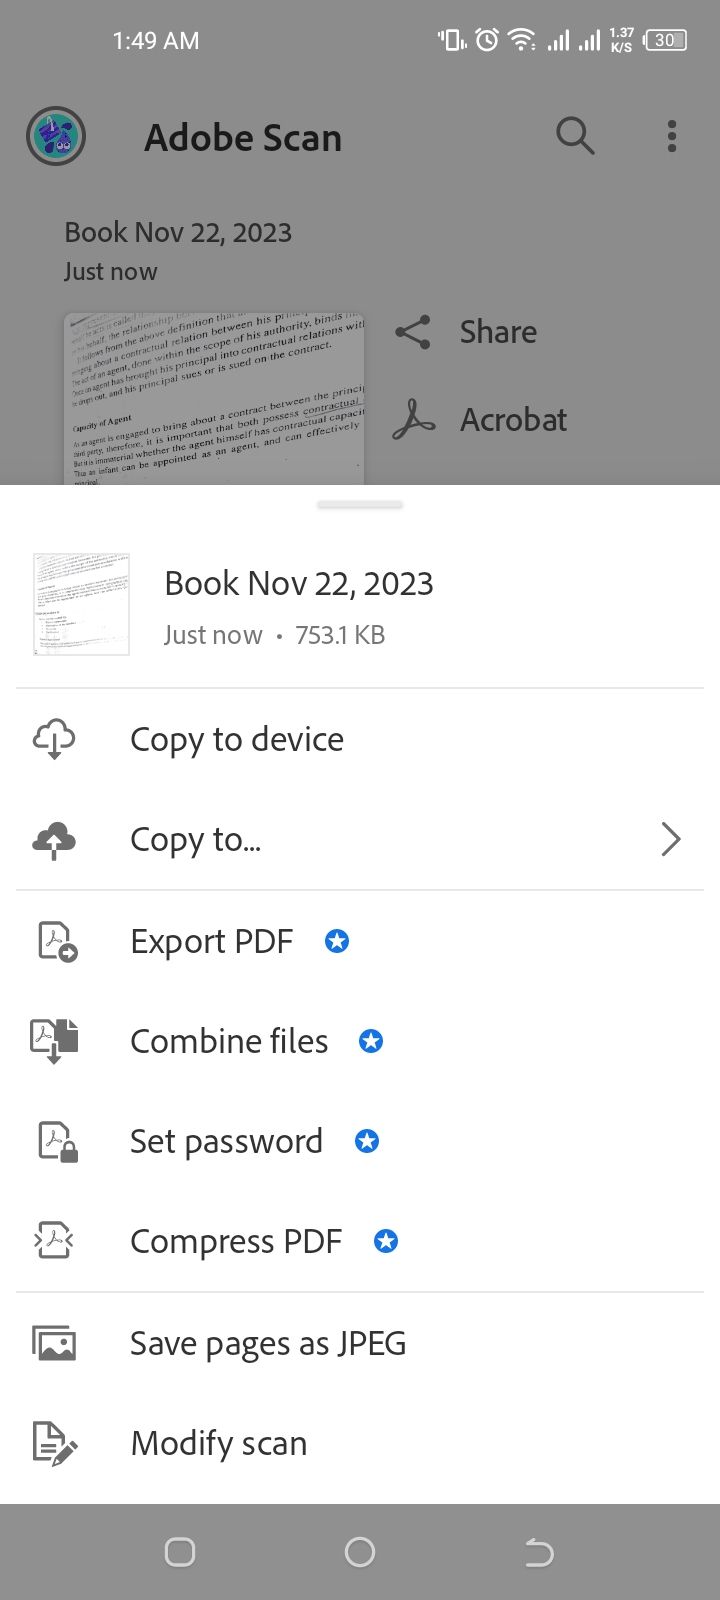 Adobe Scan app settings for sharing a document 